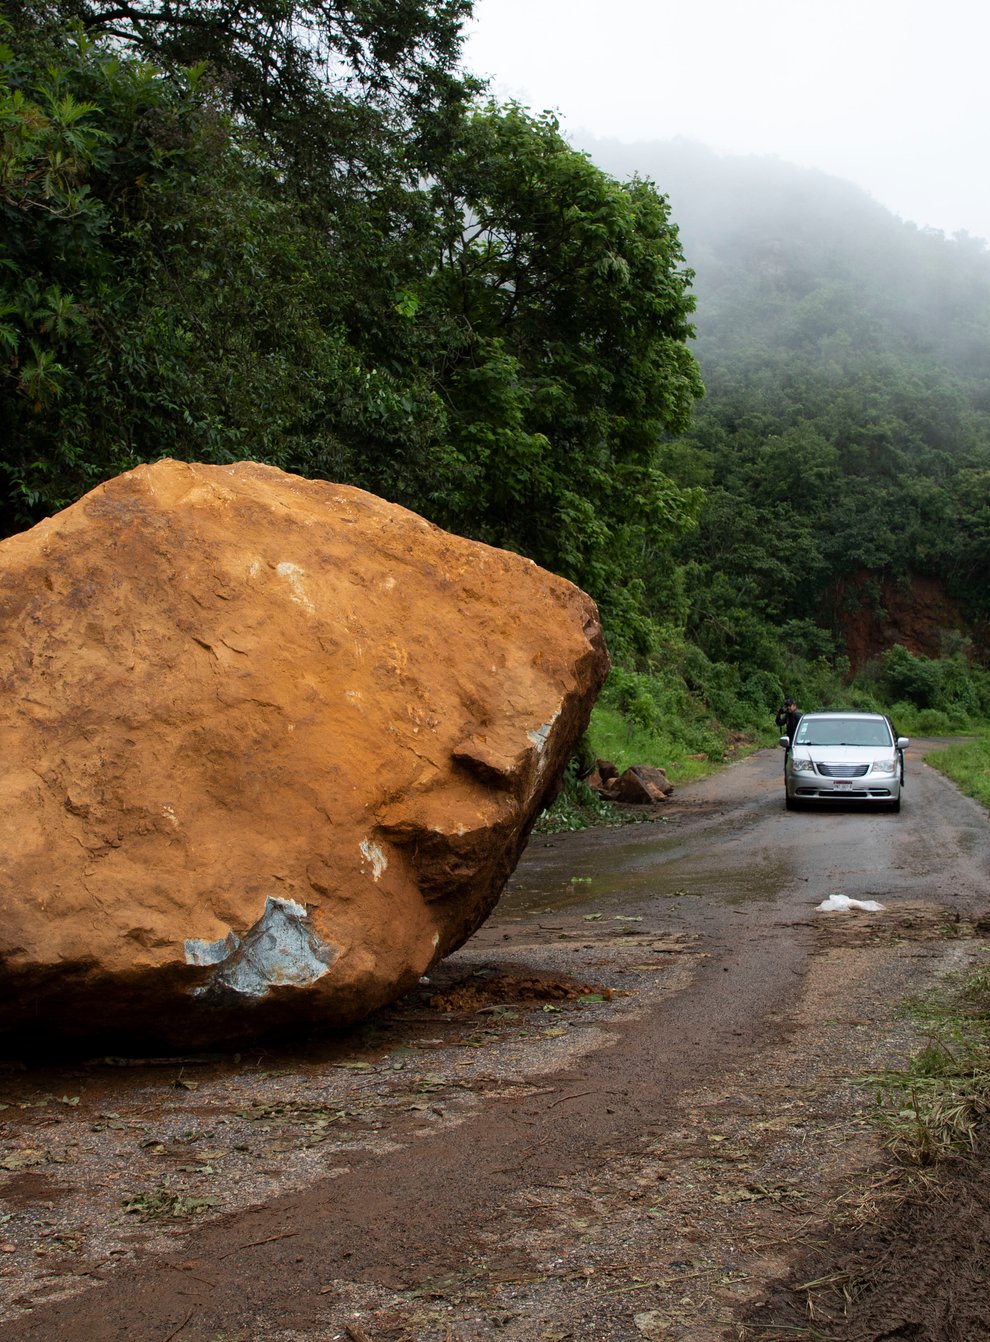 A huge boulder sits on a road, a day after an earthquake near Chinicuila, Michoacan state, Mexico, Tuesday, Sept. 20, 2022. A magnitude 7.6 earthquake shook Mexico’s central Pacific coast on Monday, centered 37 kilometers (23 miles) southeast of Aquila near the boundary of Colima and Michoacan states and at a depth of 15.1 kilometers (9.4 miles). (AP Photo/Armando Solis)